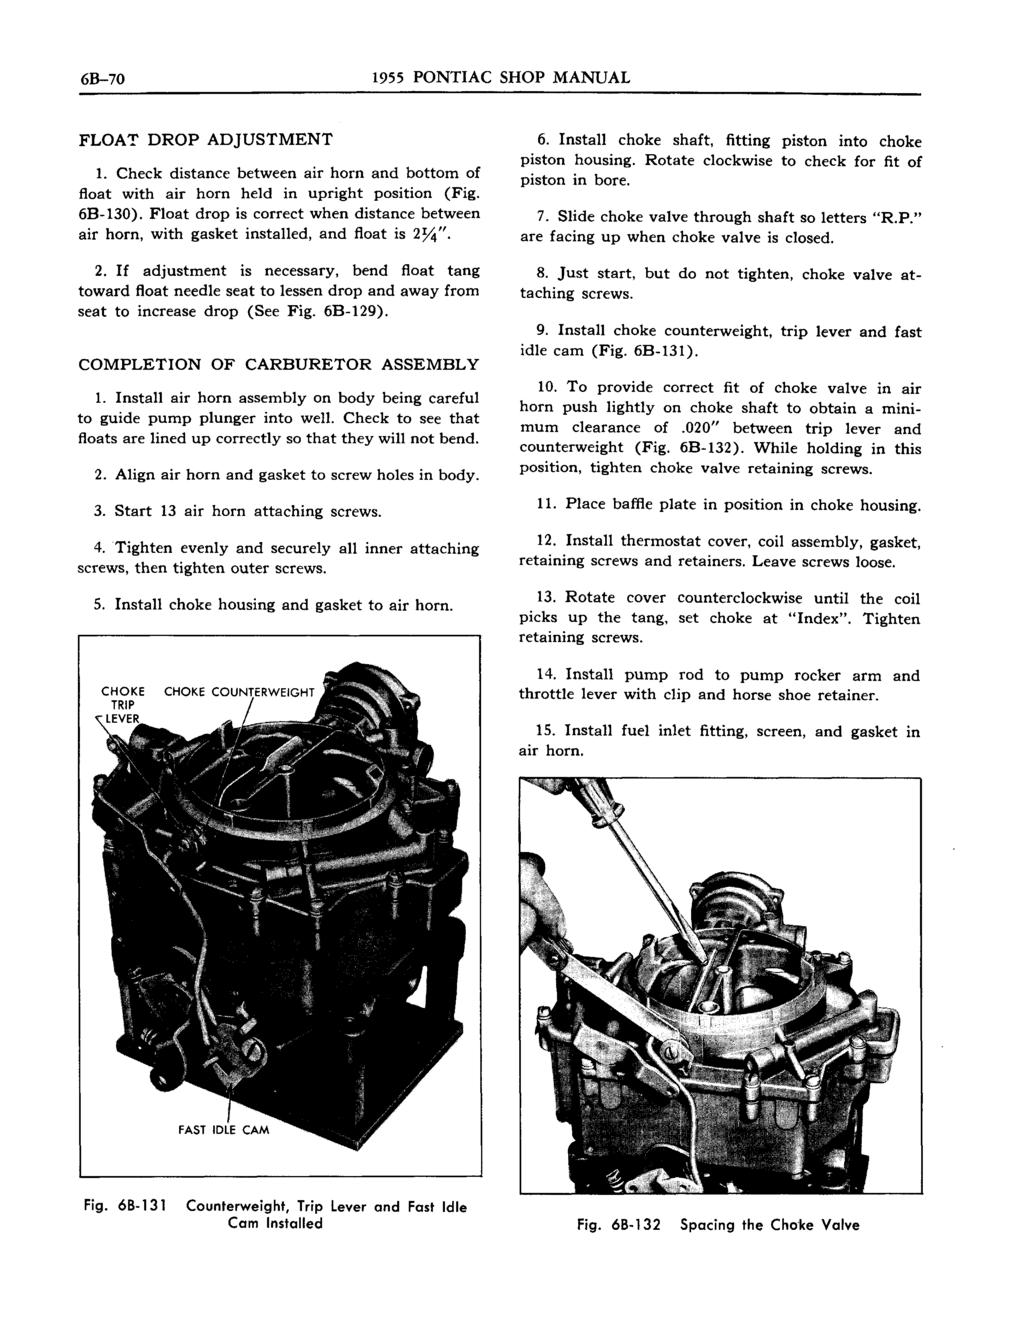 6B-70 1955 PONTIAC SHOP MANUAL FLOAT DROP ADJUSTMENT 1. Check distance between air horn and bottom of float with air horn held in upright position (Fig. 6B-130).